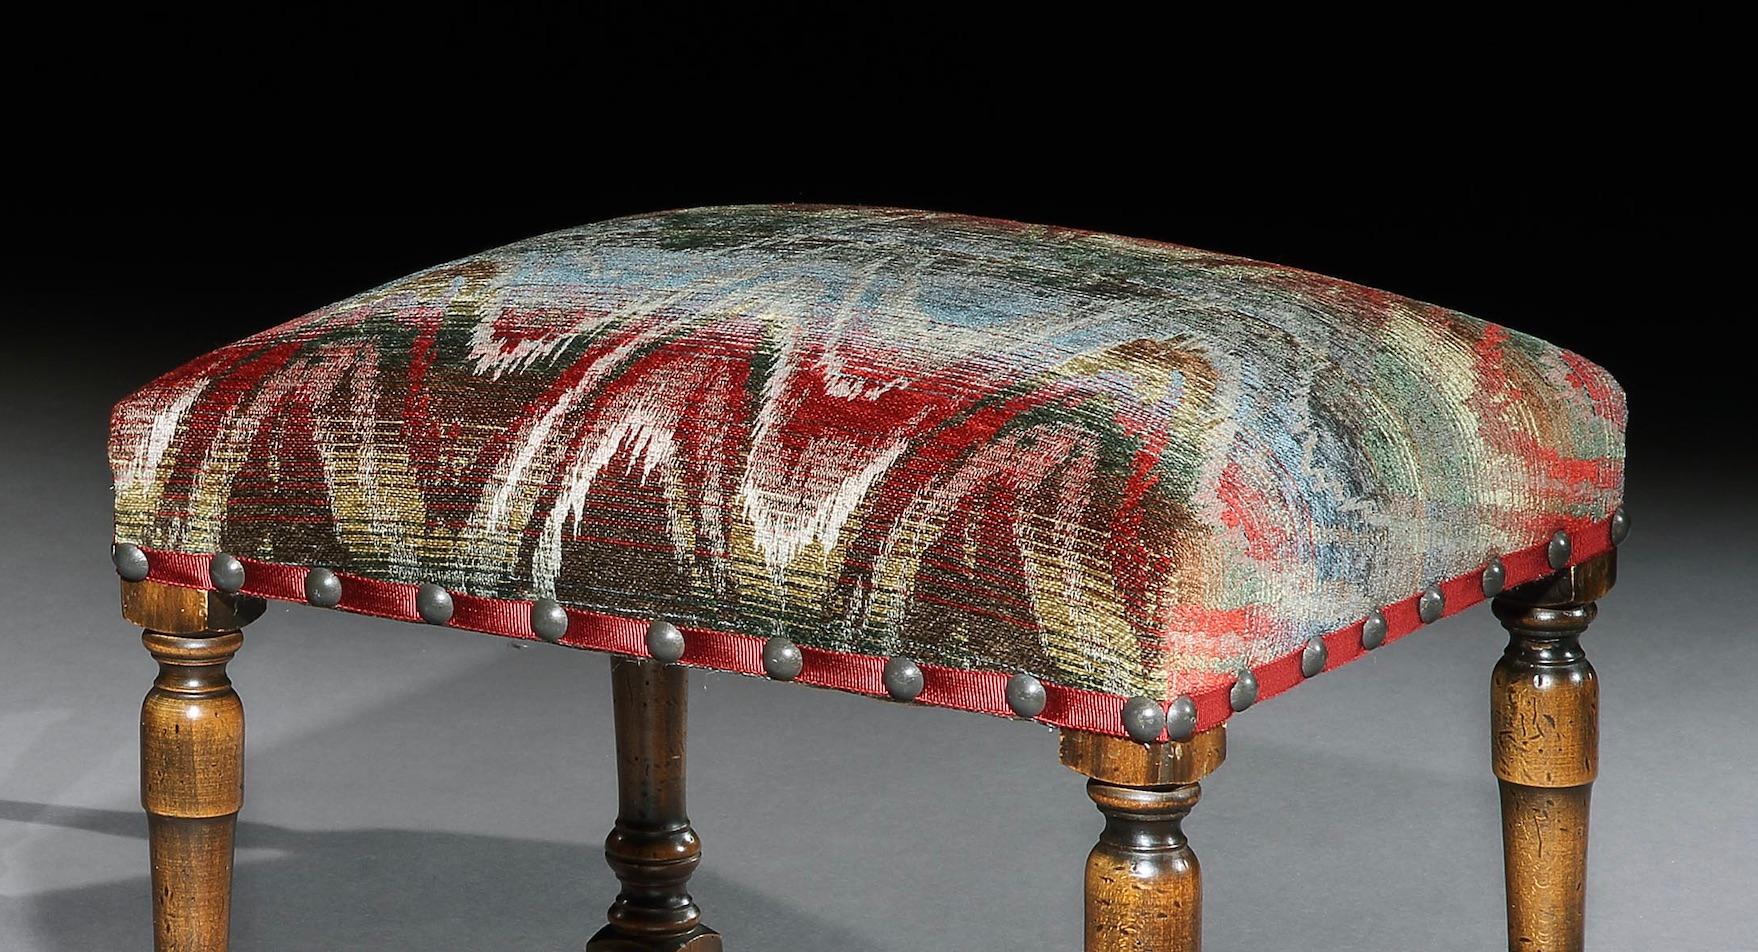 Baroque Revival Stool Pair of Upholstered Walnut Bargello Flame Stitch Baroque-Style Antiquarian